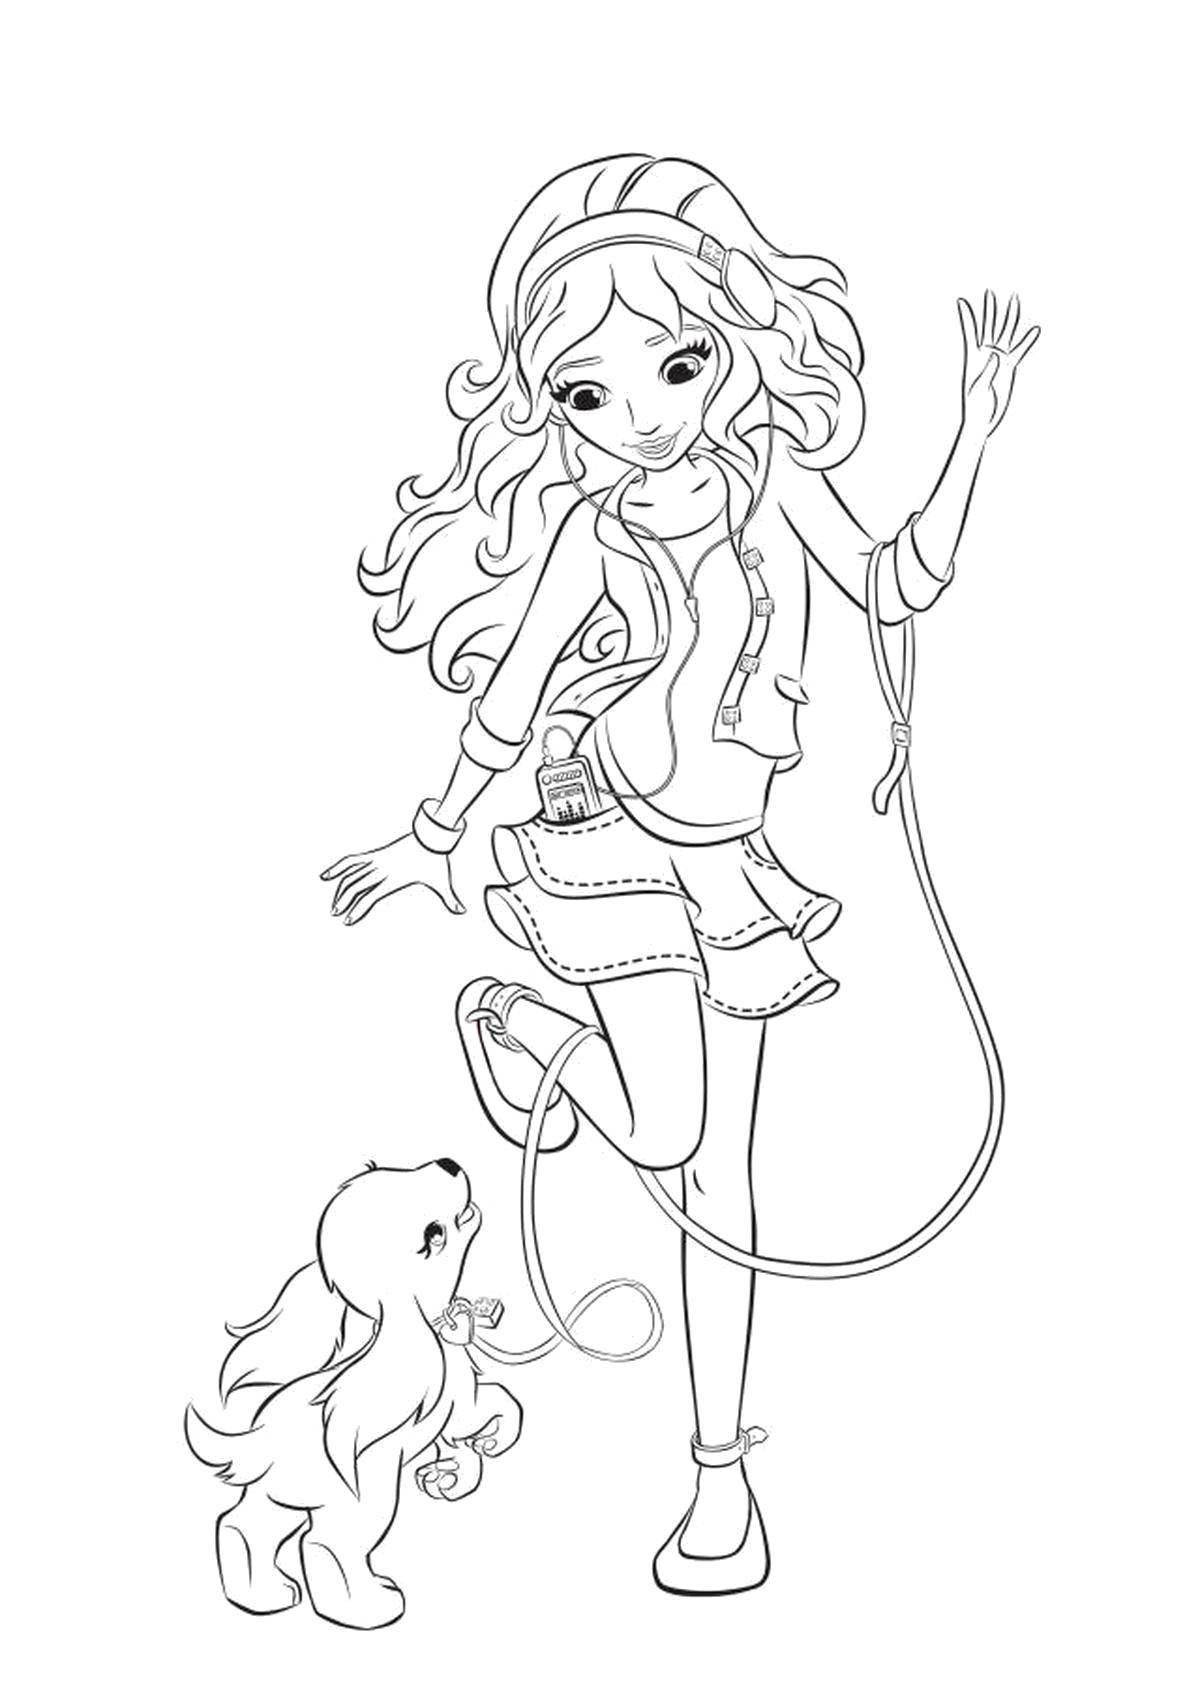 Coloring Barbie with puppy. Category coloring pages for girls. Tags:  Girl, beauty, fashionista, fashion.